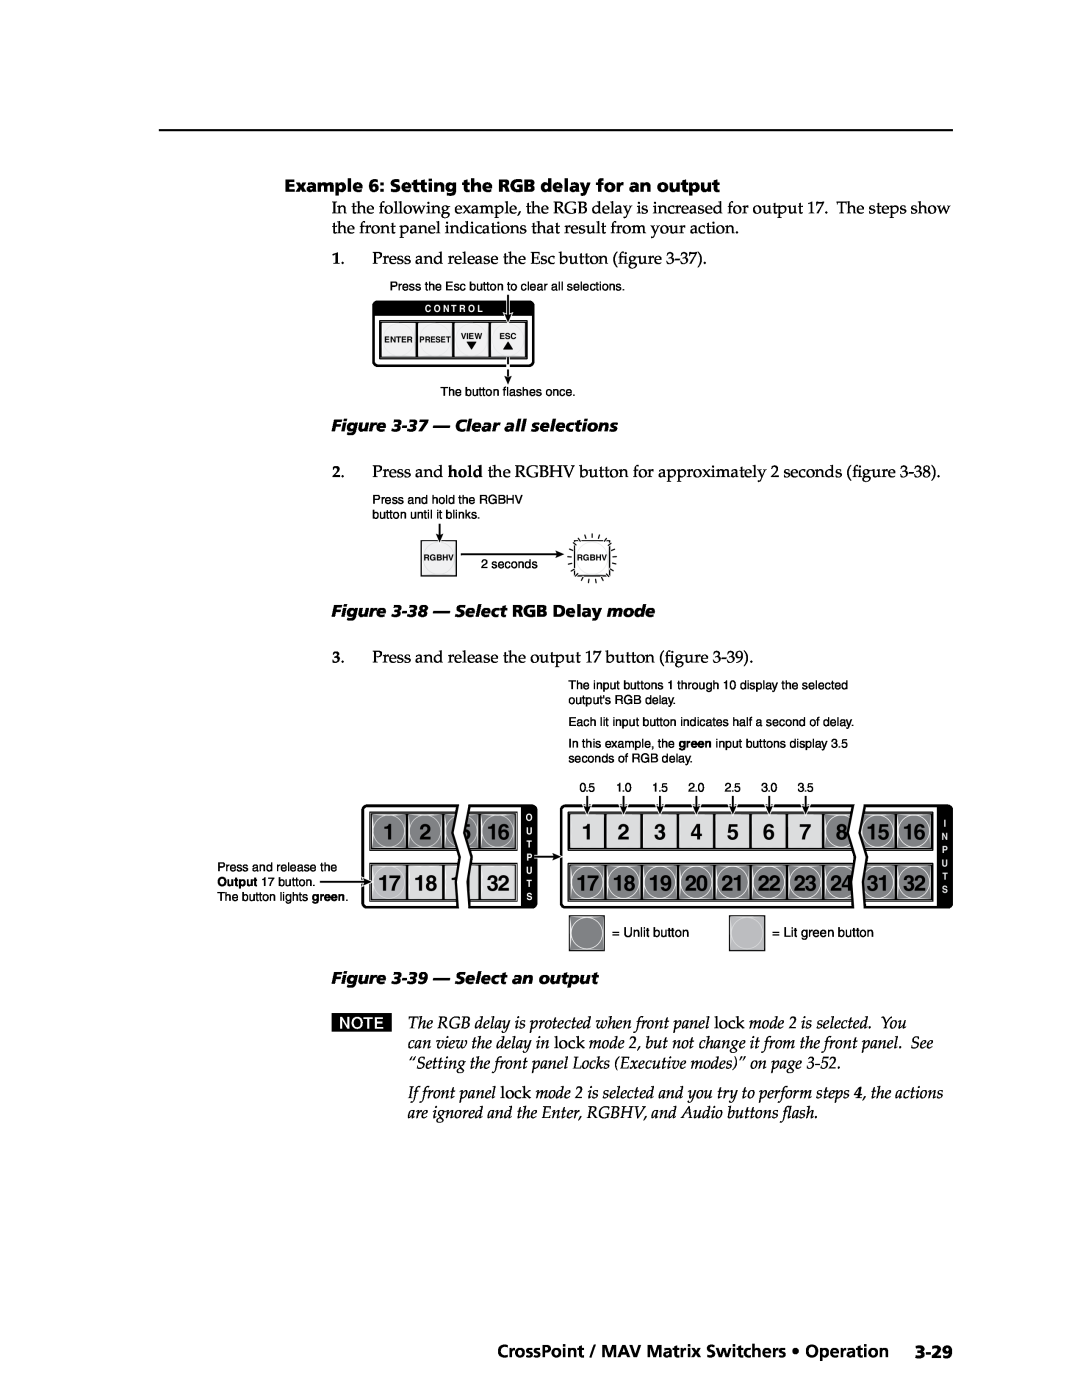 Extron electronic Ultra Series manual 22 23 24, Example 6 Setting the RGB delay for an output, 37 - Clear all selections 